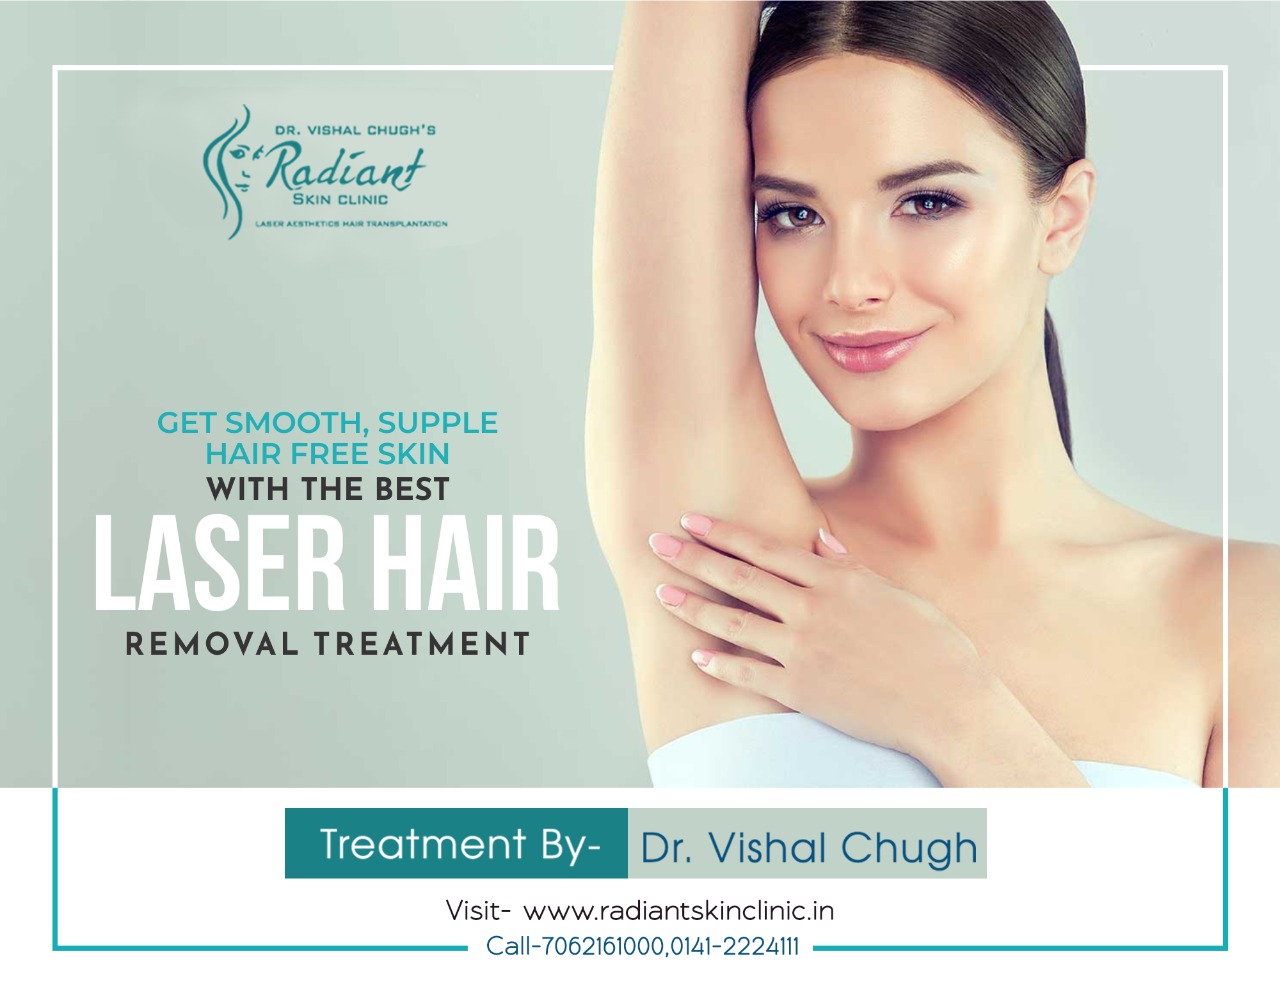 Best laser hair removal treatment